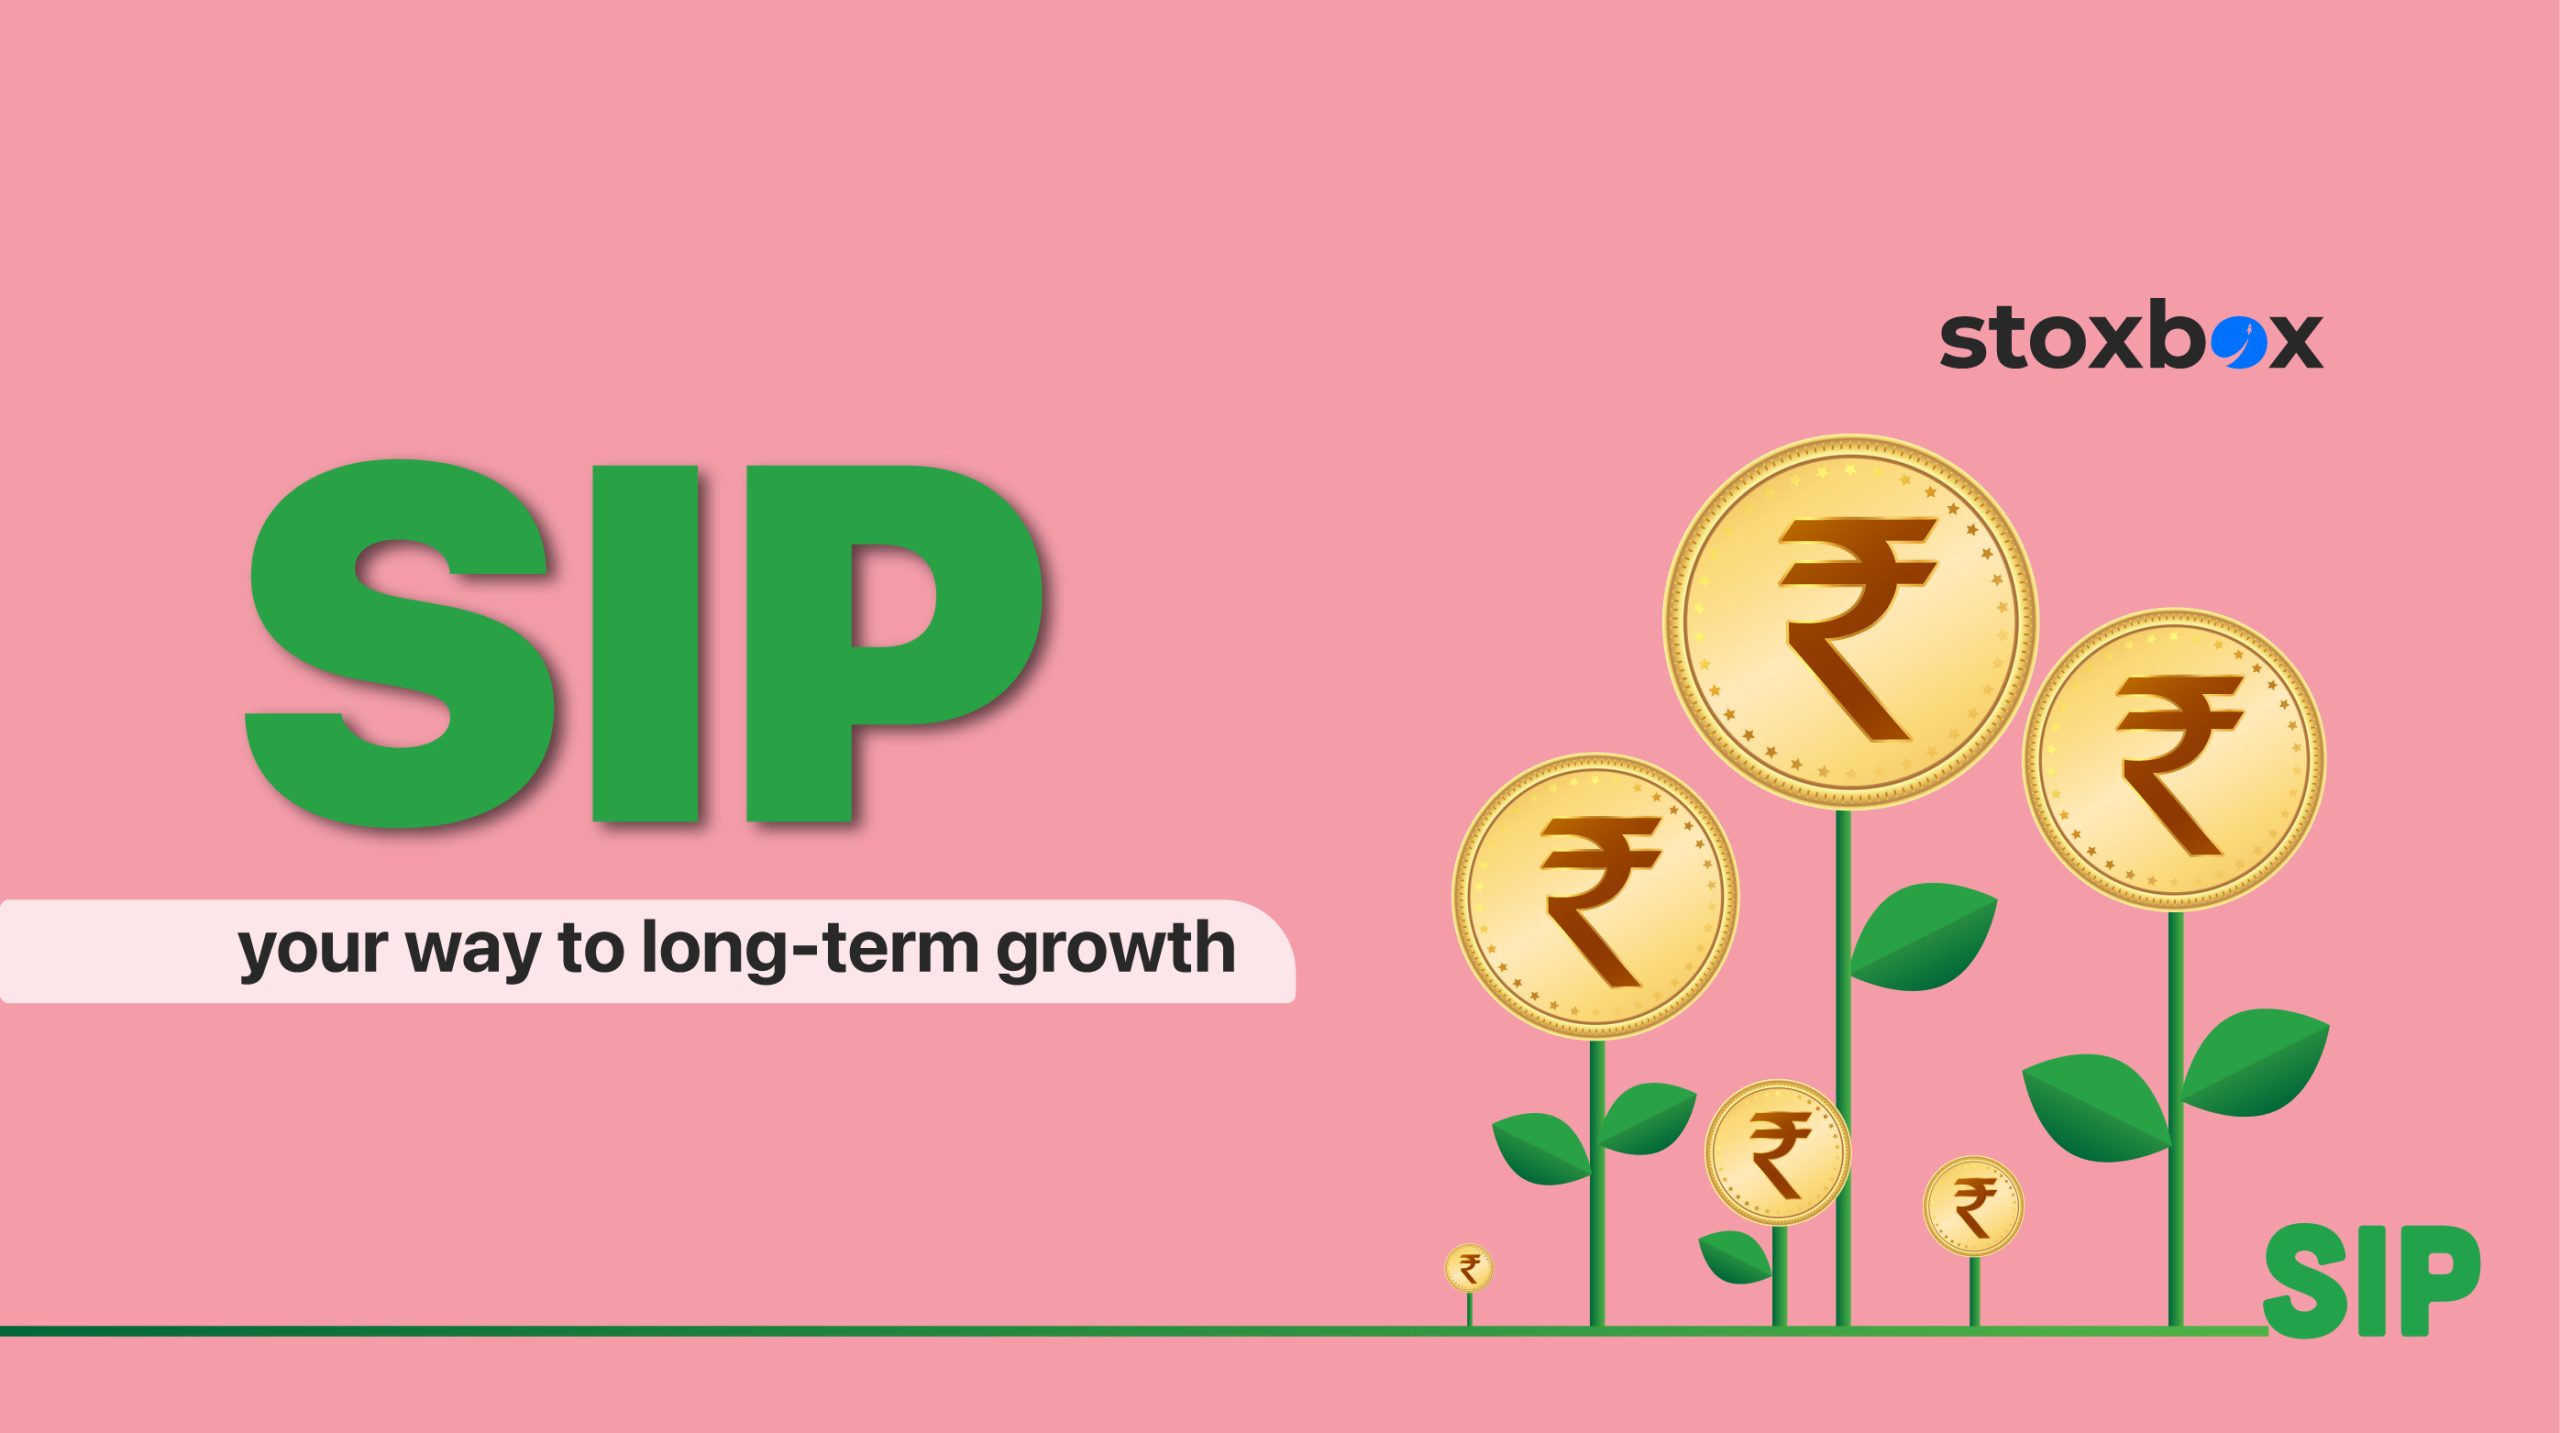 SIP your way to long-term growth